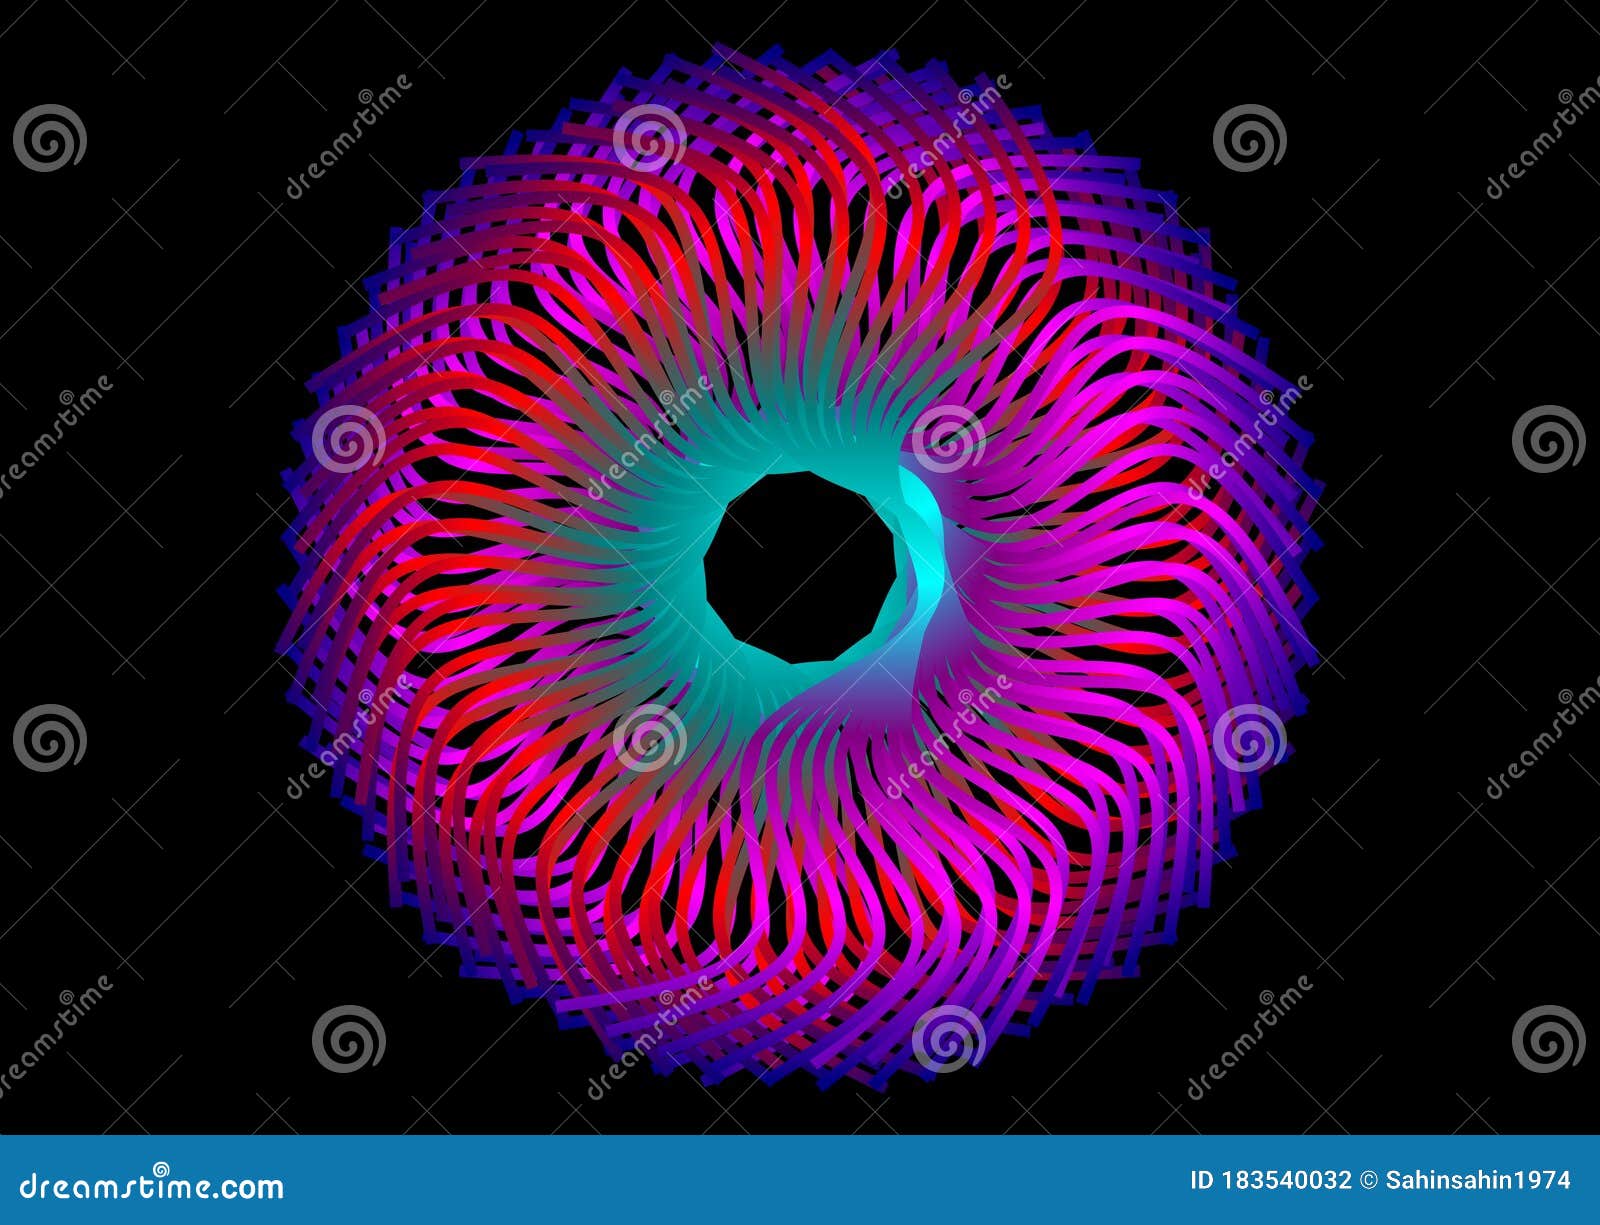 Download wallpaper 1920x1080 circle colorful shape full hd hdtv fhd  1080p hd background